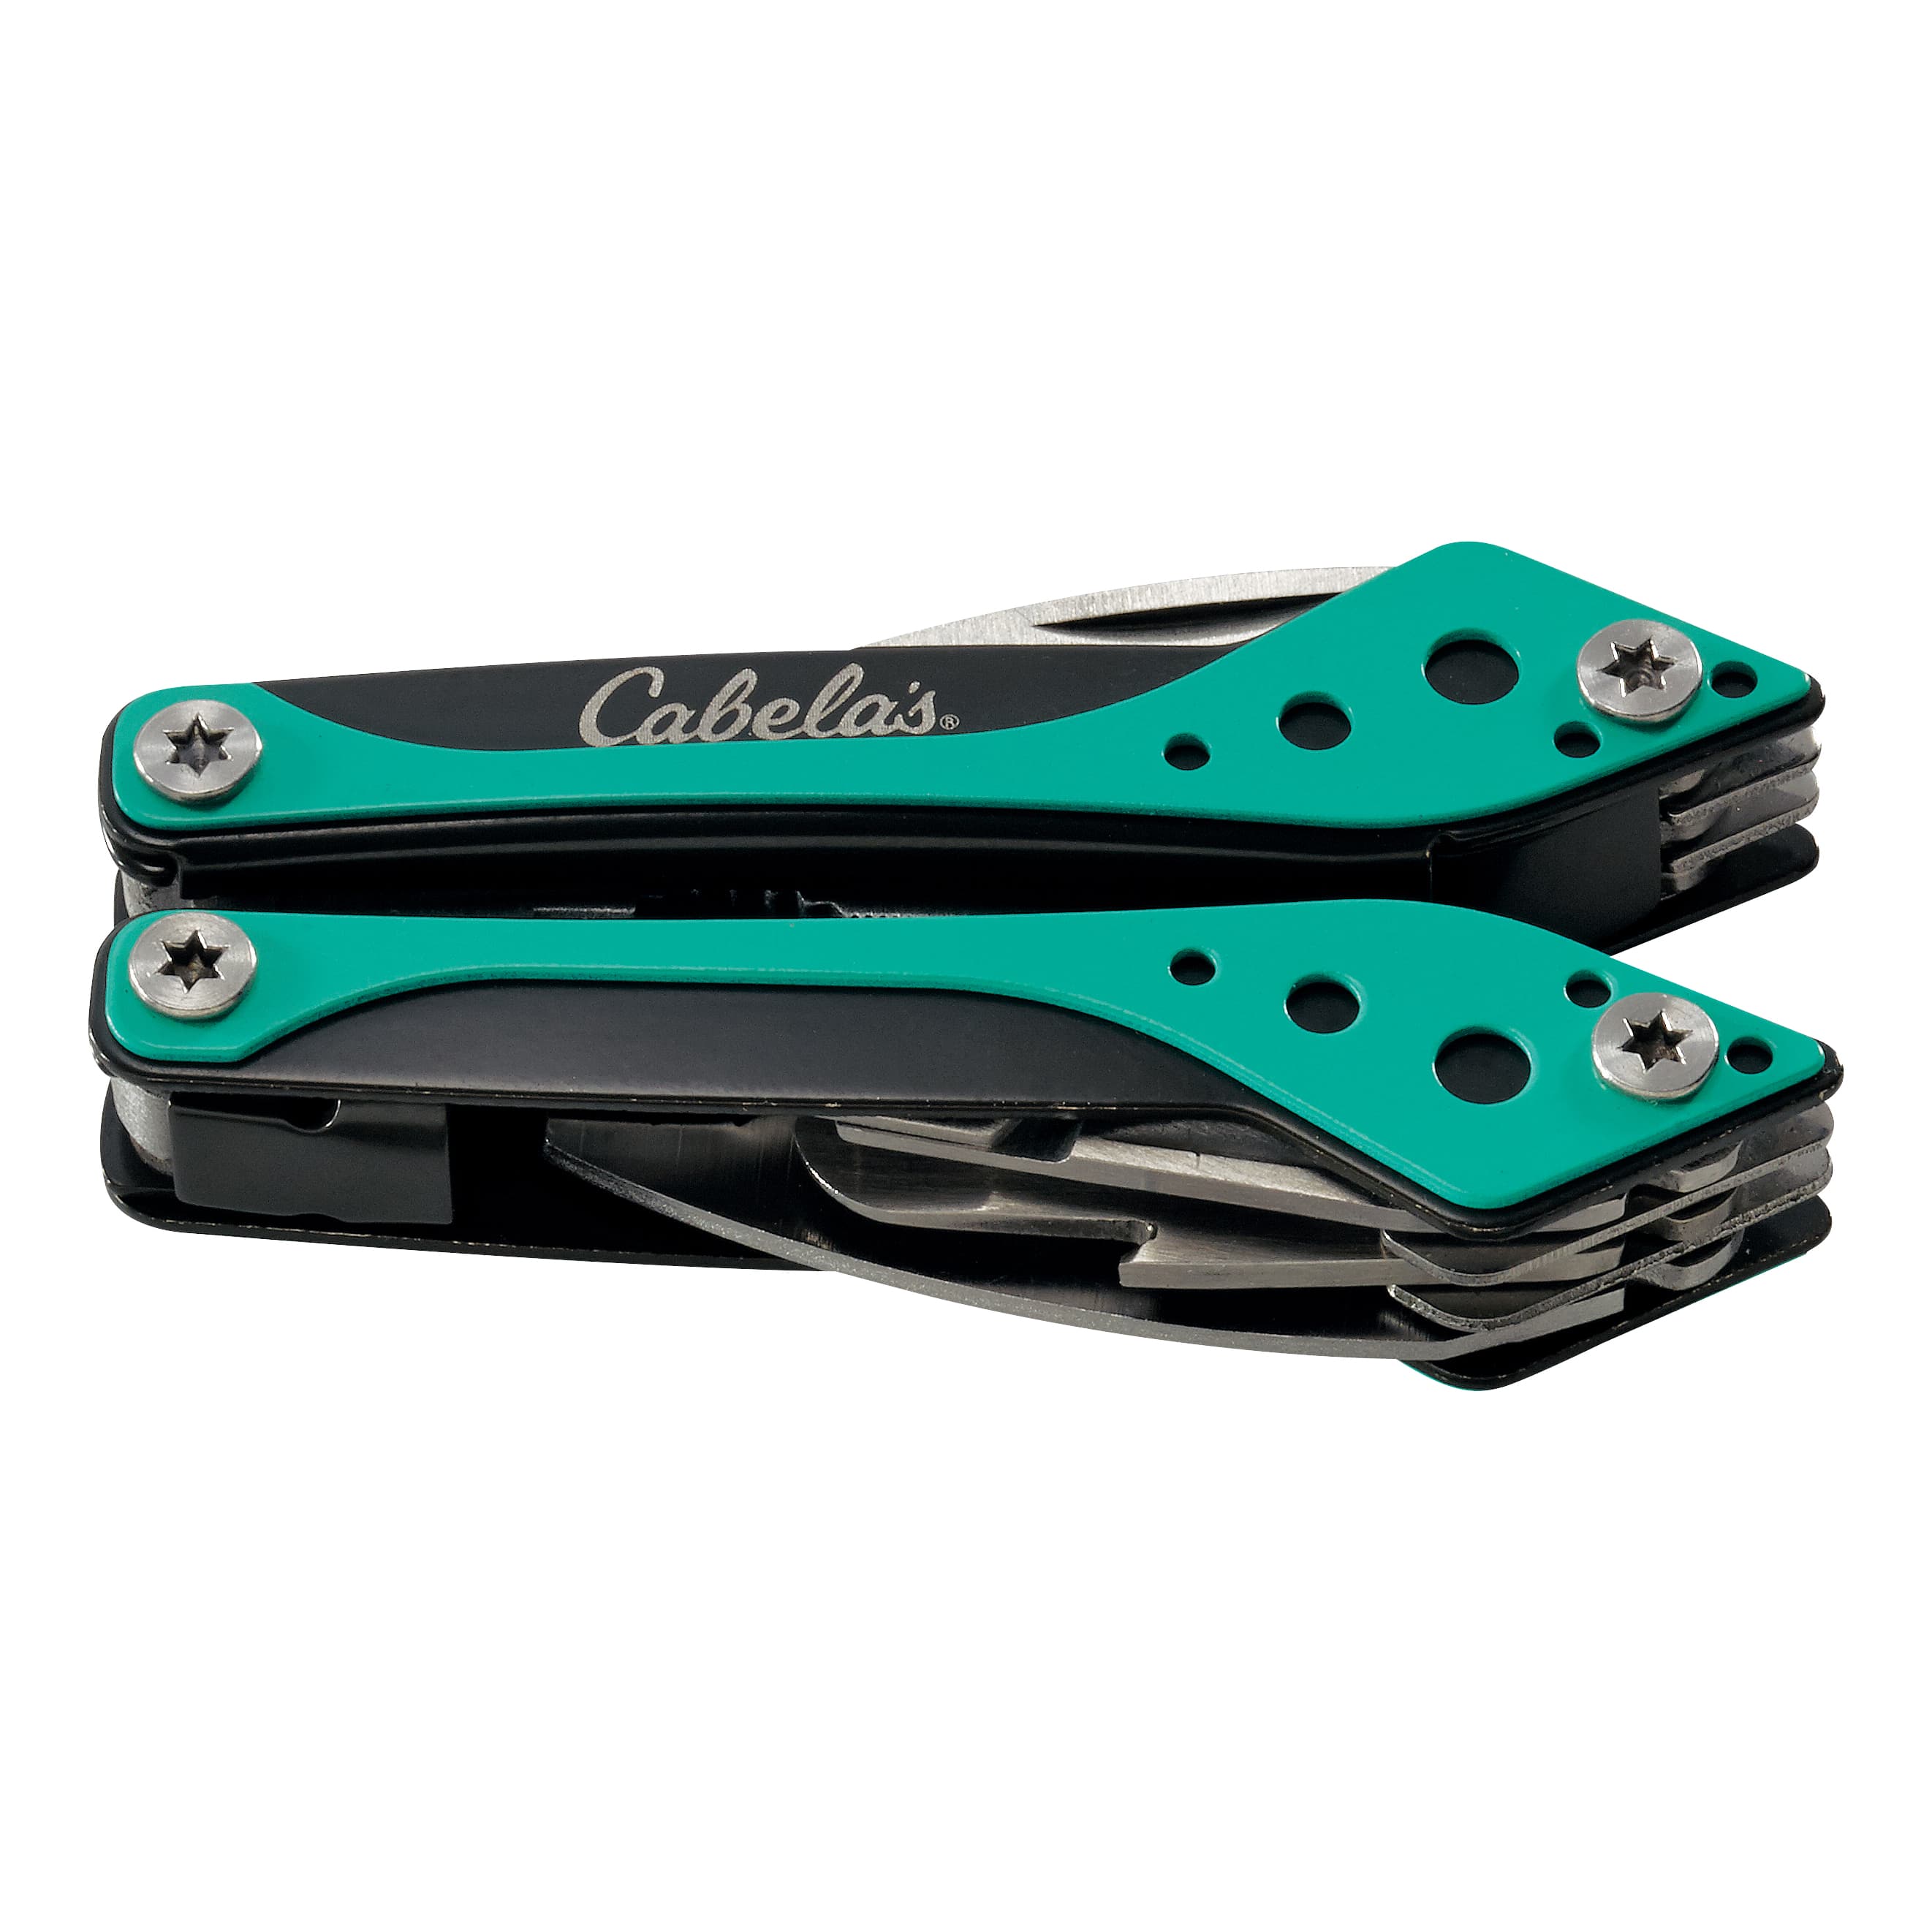 Cabela's Multitool - Teal - Closed View